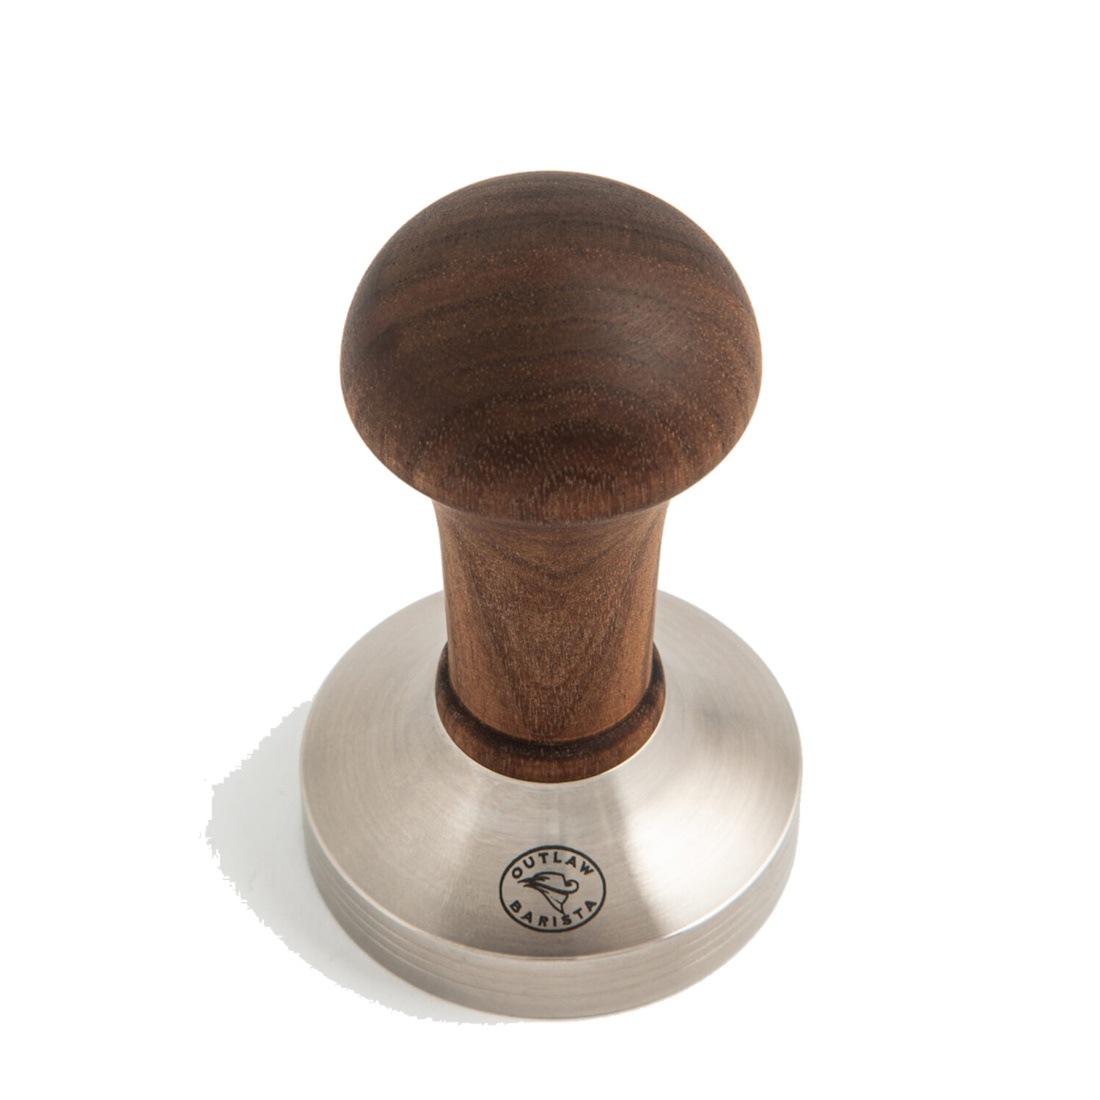 Otto Hauck - Outlaw Barista Tamper, 58,5mm